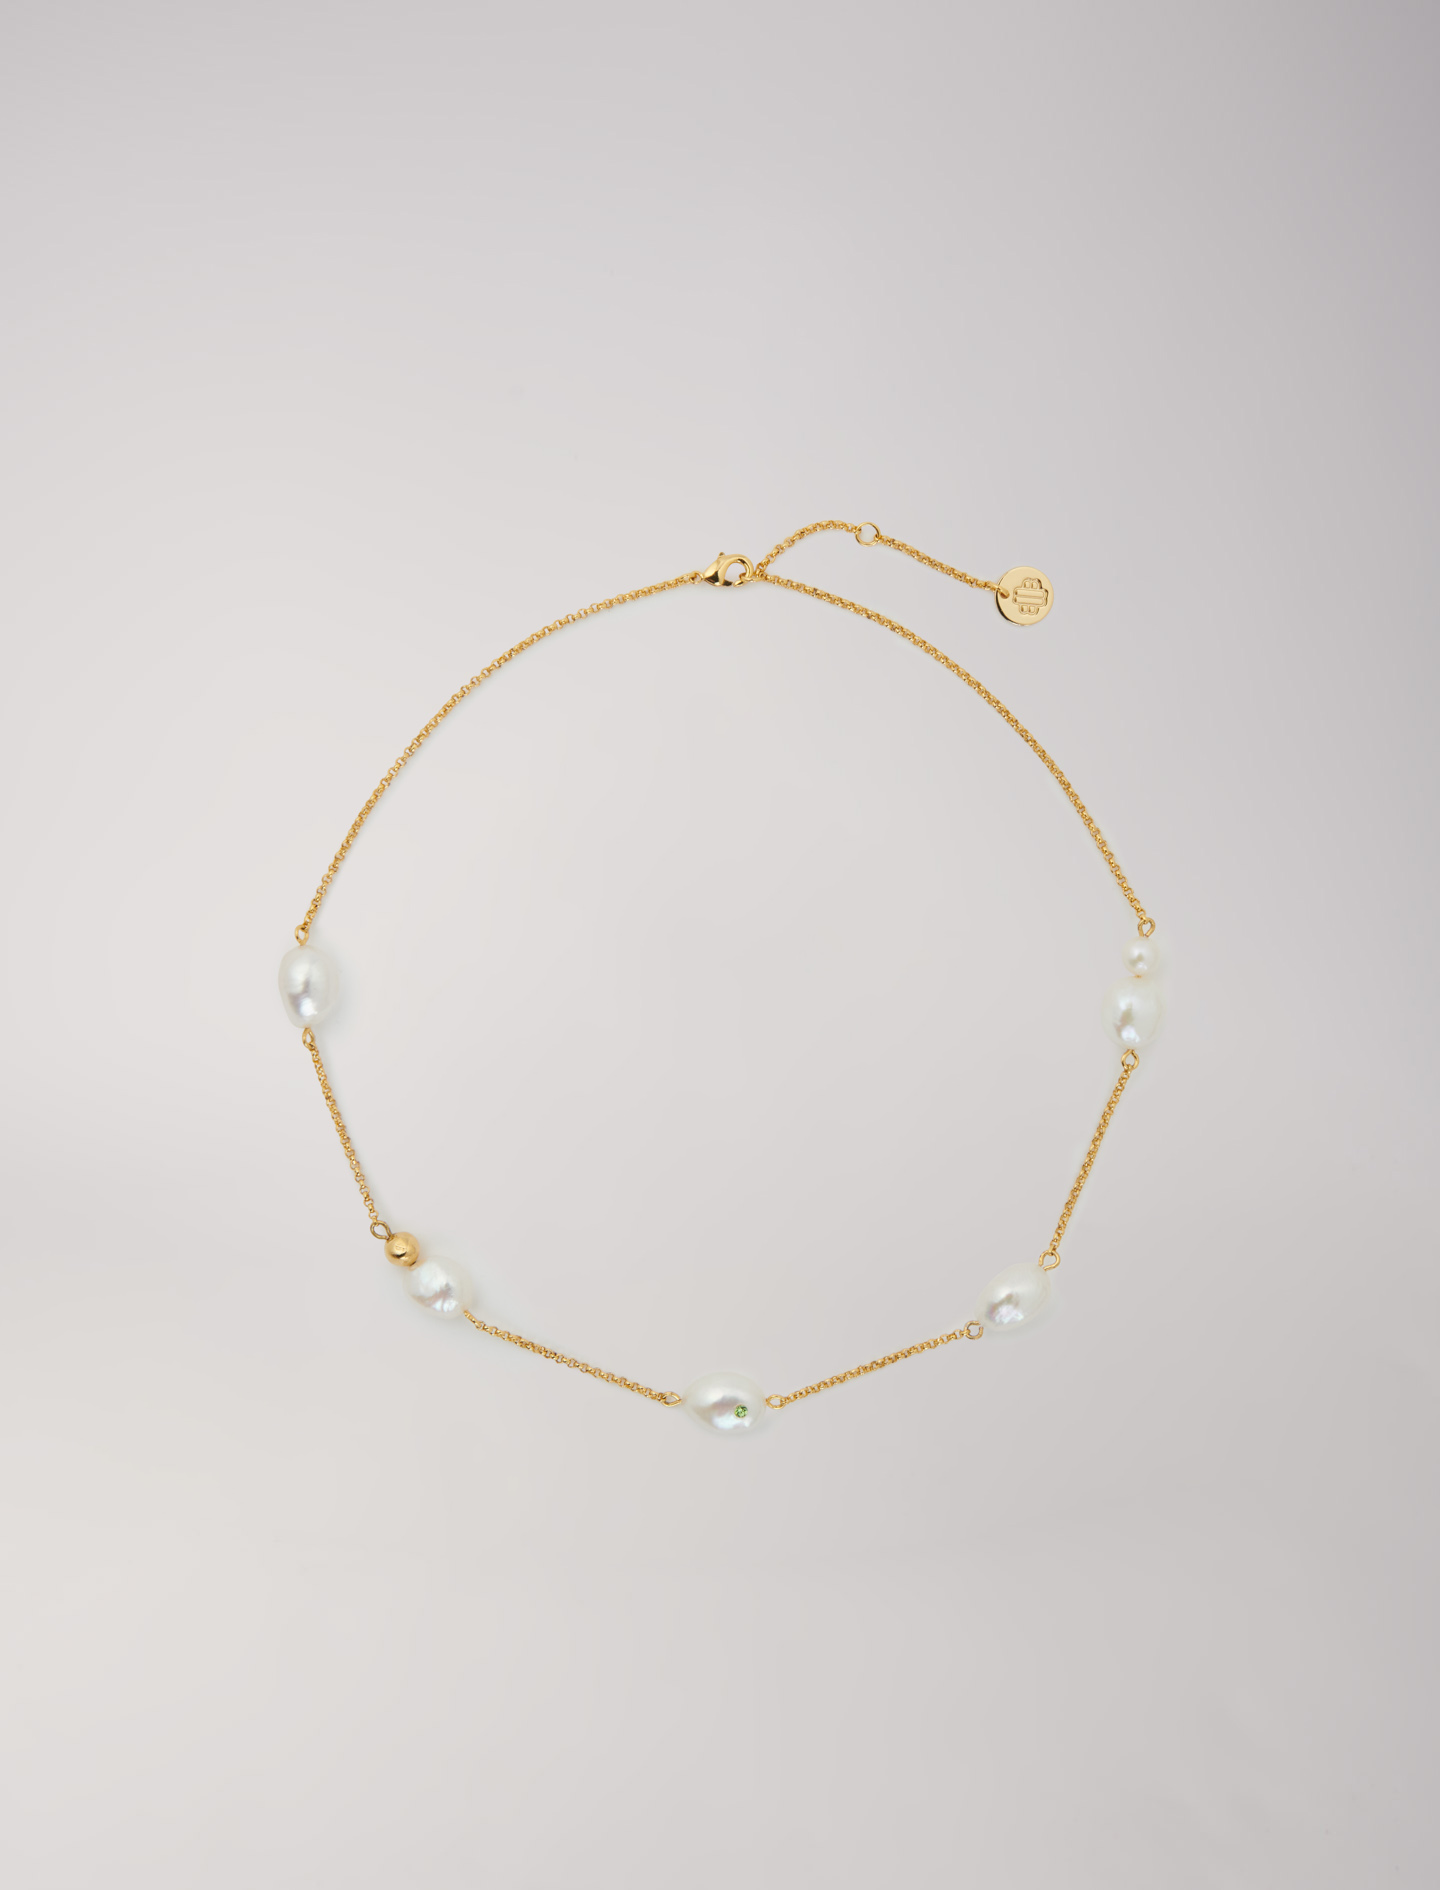 Mixte's nacre Jewellery: Gold chain and bead necklace for Spring/Summer, size Mixte-Jewelry-OS (ONE SIZE), in color Gold / Yellow